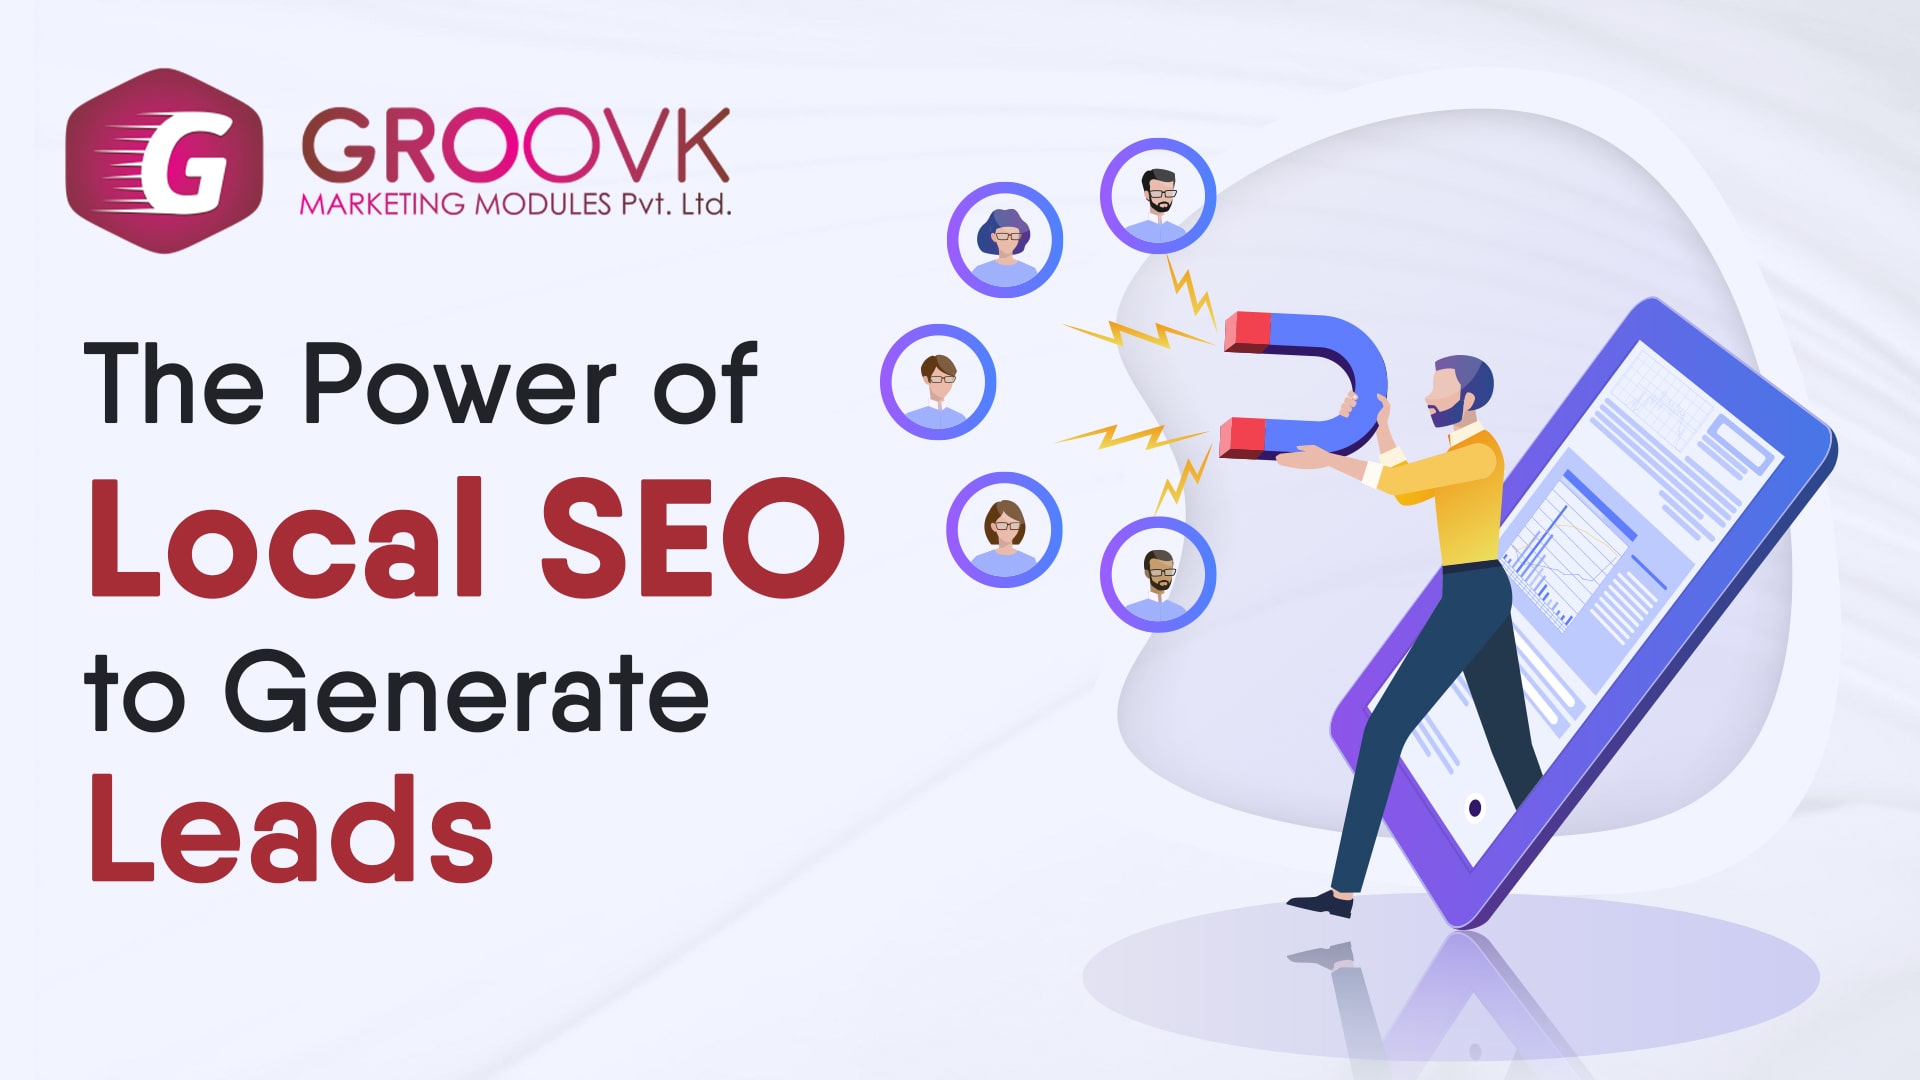 The Power of Local SEO to Generate Leads - Groovk Marketing
								